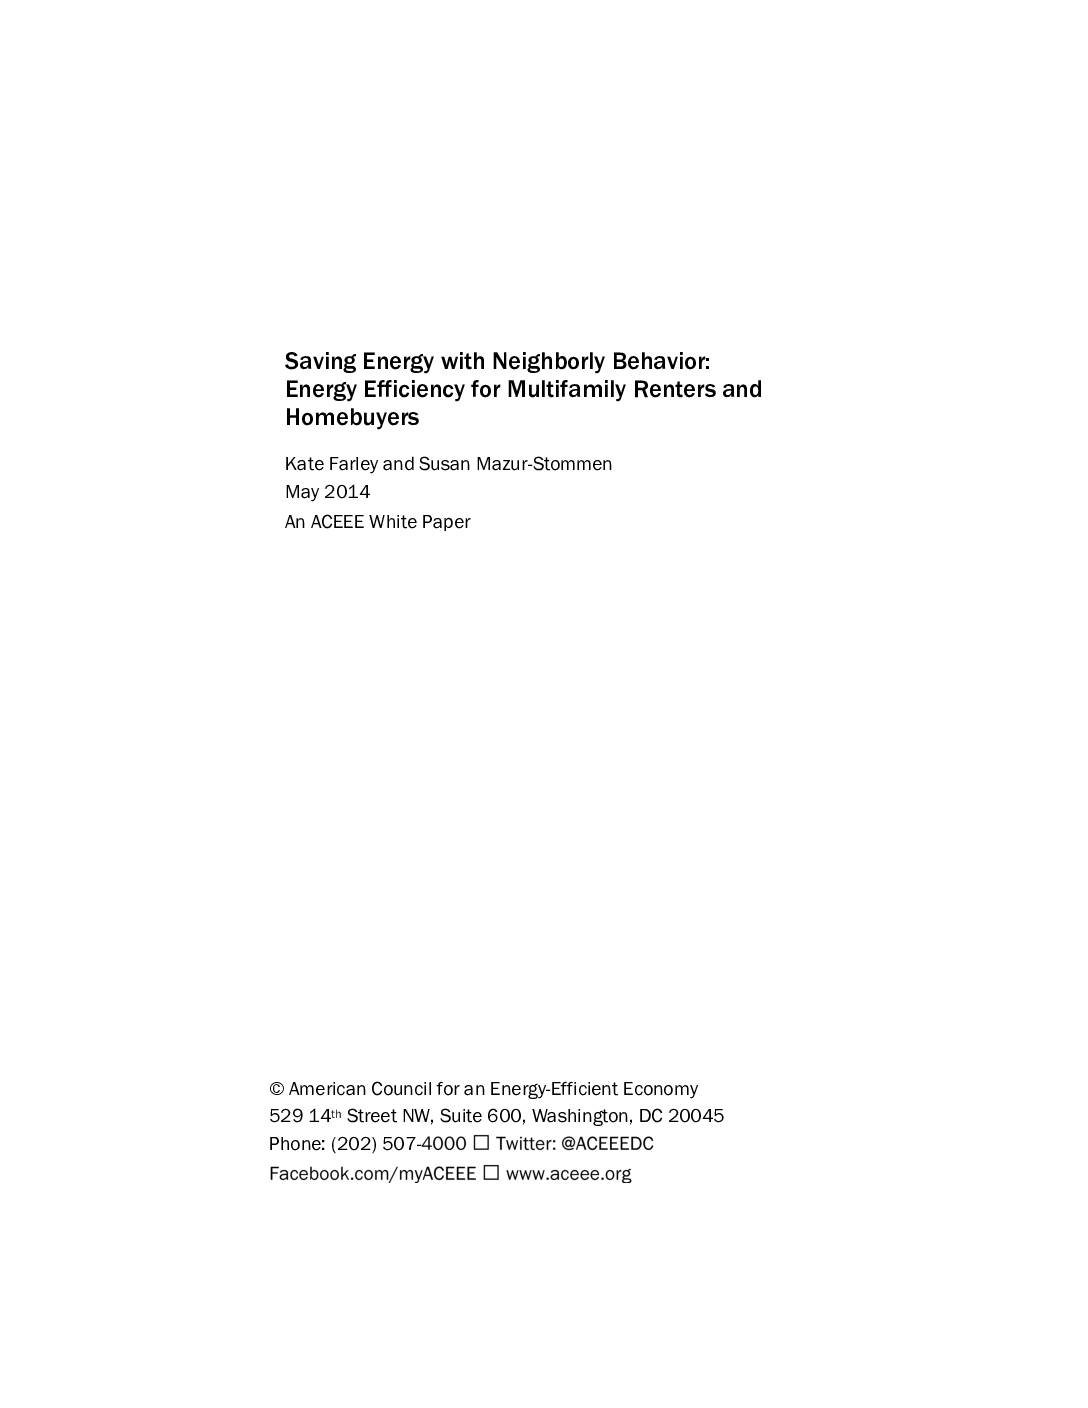 Saving Energy with Neighborly Behavior: Energy Efficiency for Multifamily Renters and Homebuyers